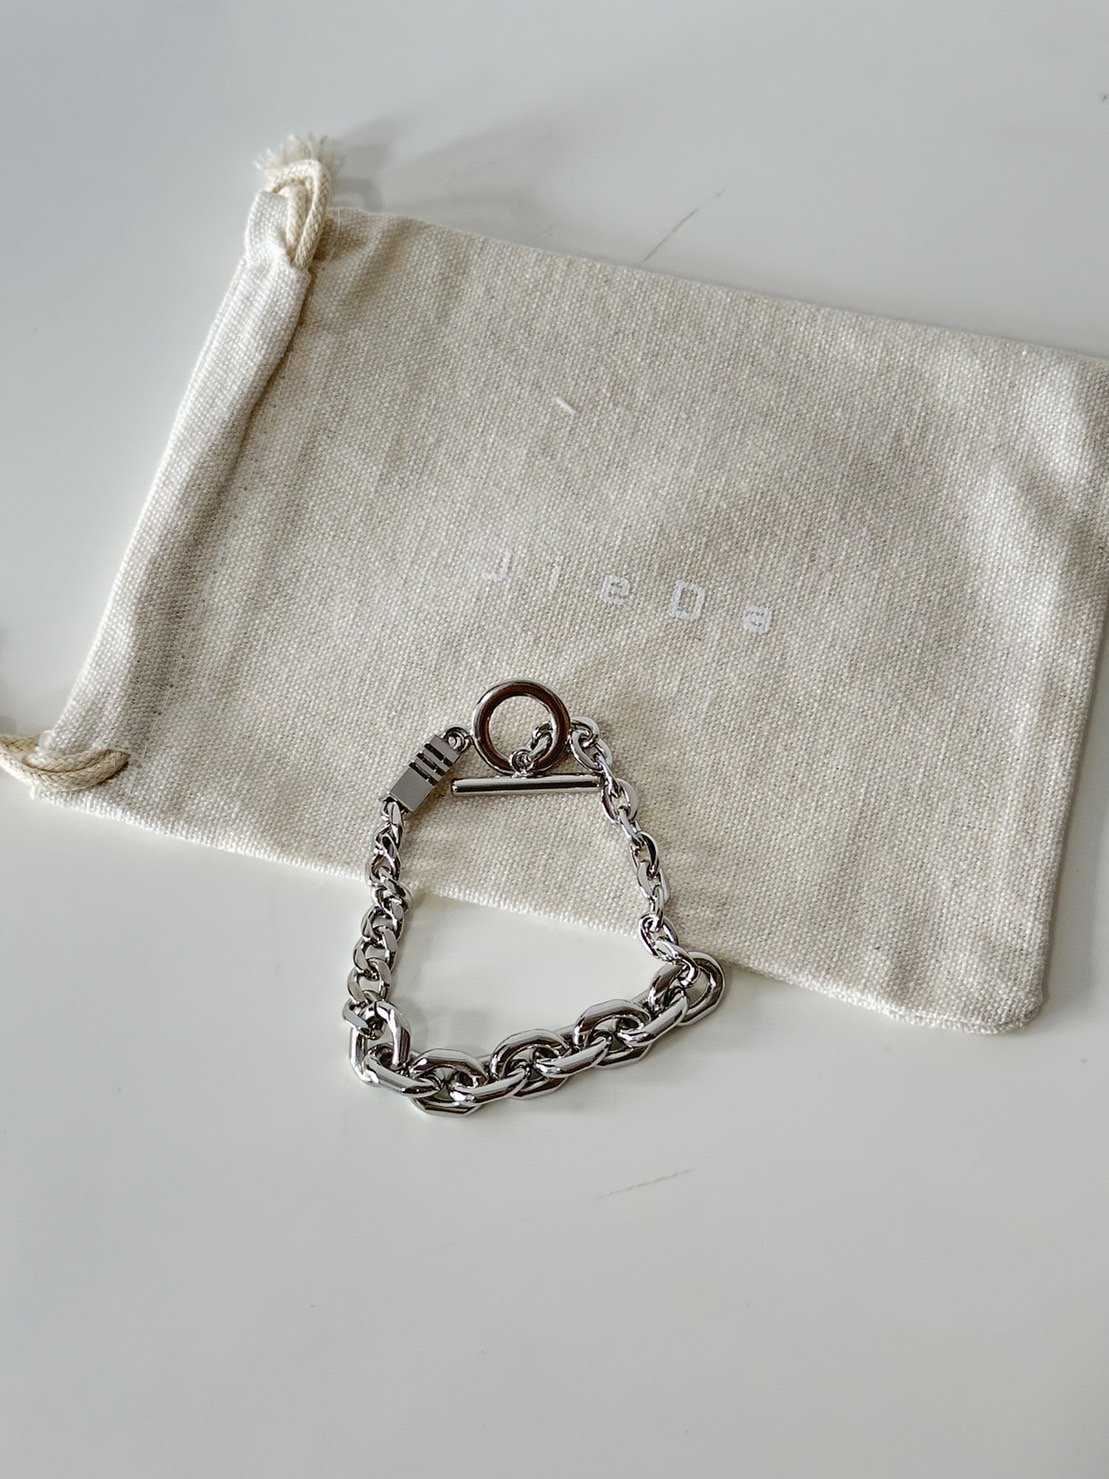 JieDa<br />SWITCHING BRACELET / SILVER<img class='new_mark_img2' src='https://img.shop-pro.jp/img/new/icons47.gif' style='border:none;display:inline;margin:0px;padding:0px;width:auto;' />